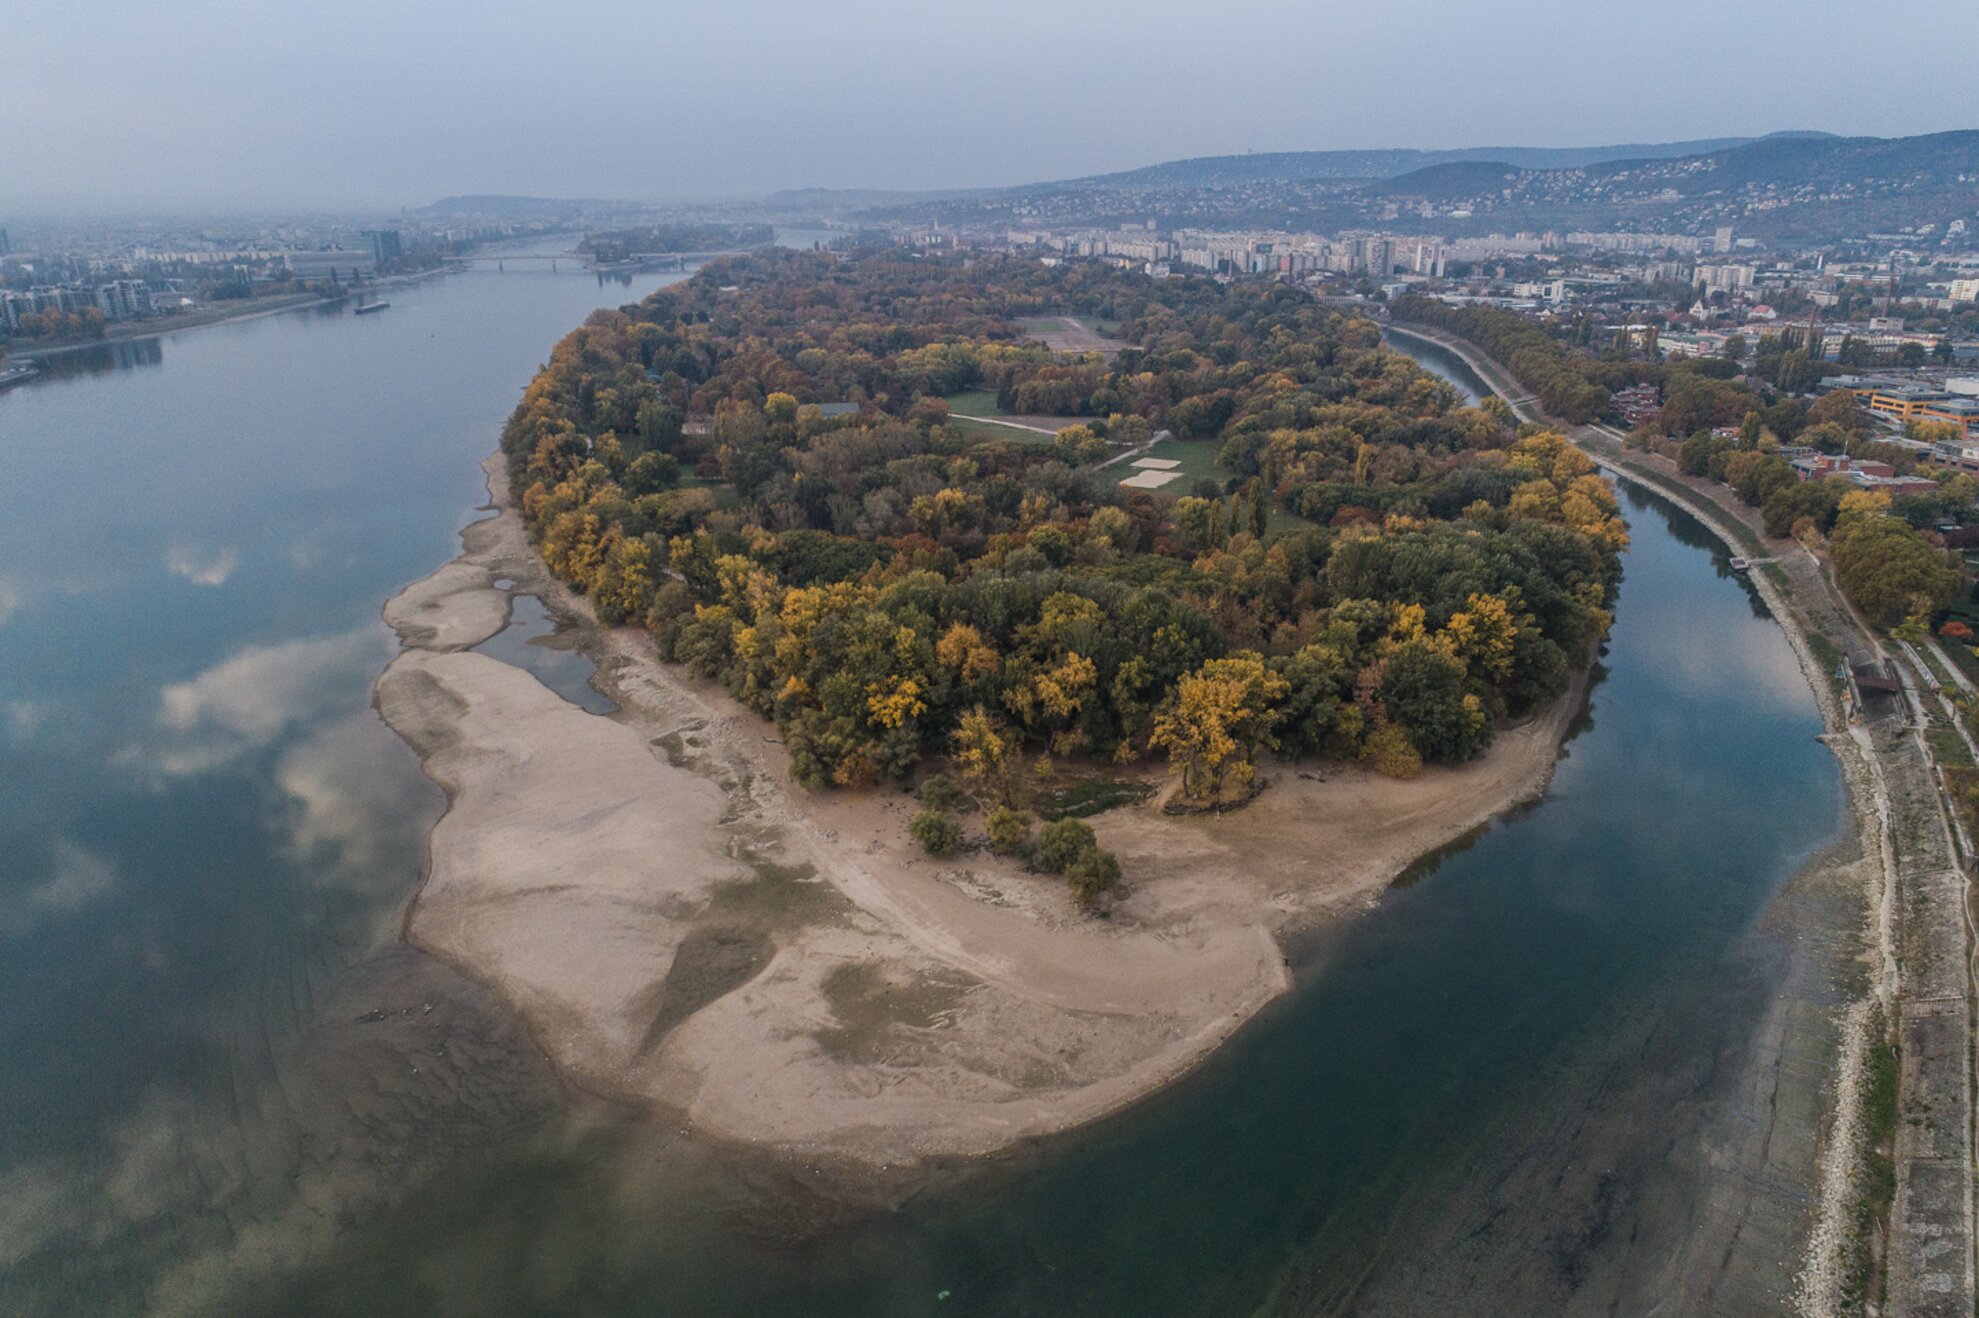 Striking drone photos reveal extreme low water levels in the Danube